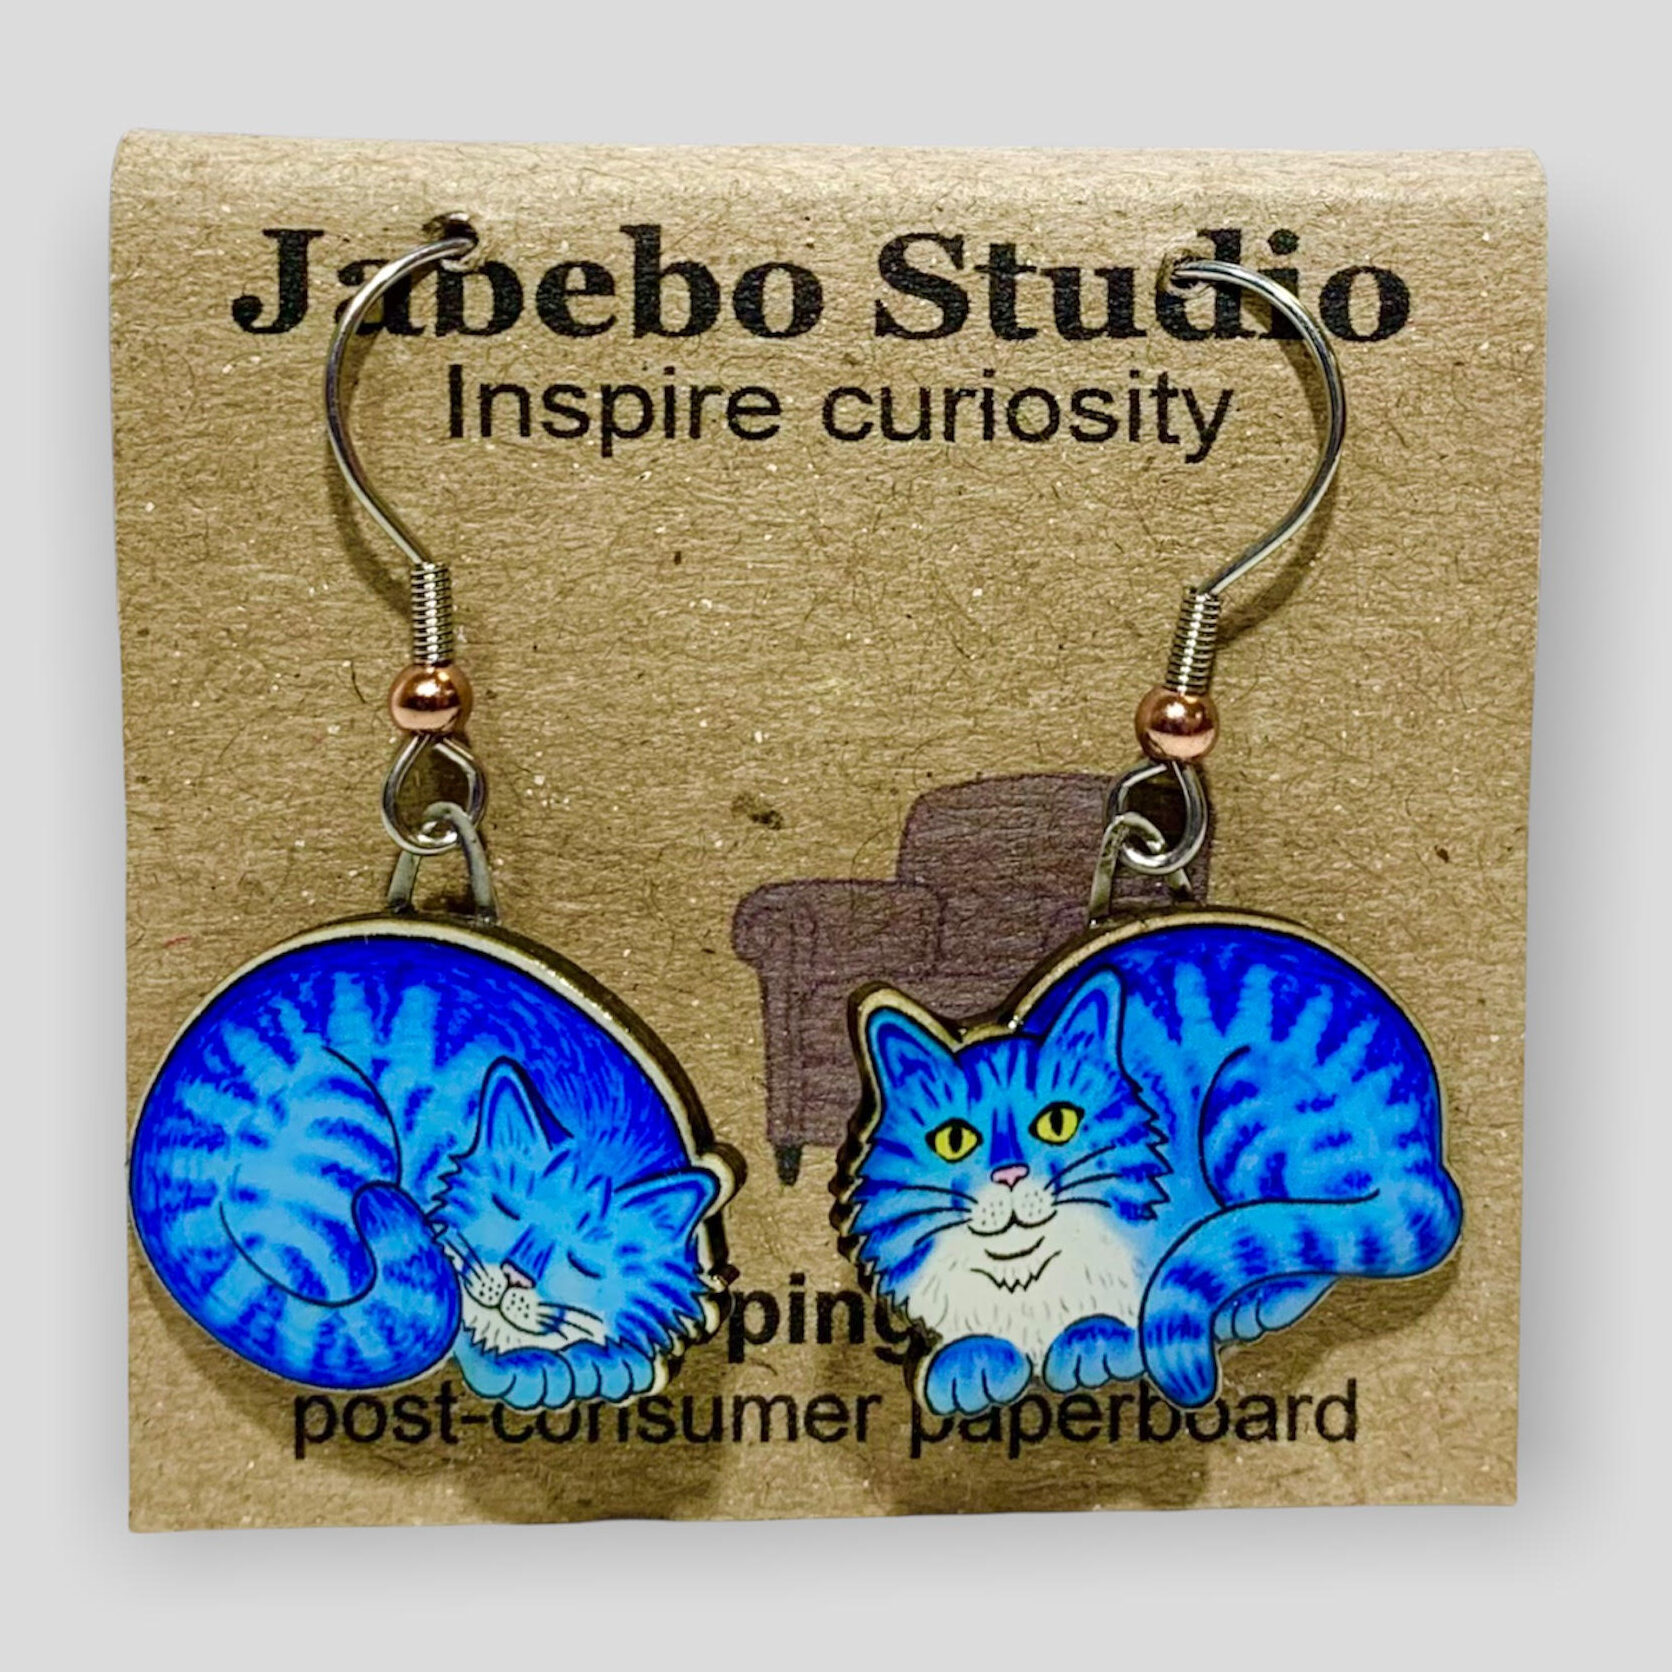 Picture shown is of 1 inch tall pair of earrings of the pet the Blue Napping Cat.